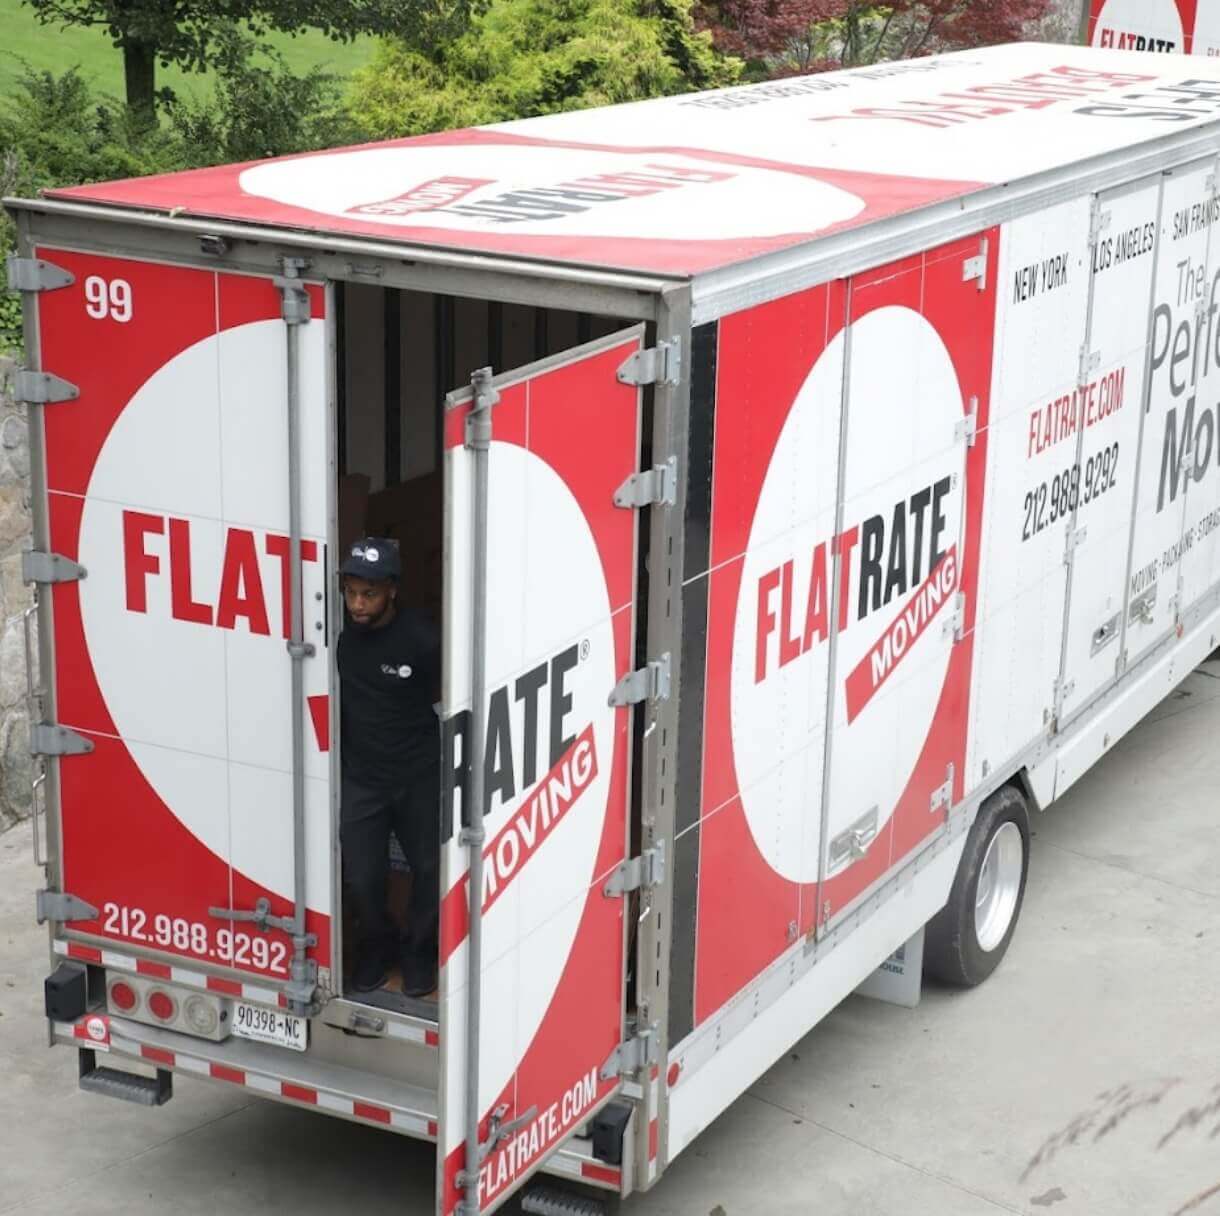 Flatrate moving truck parked with the back door open, ready for loading or unloading